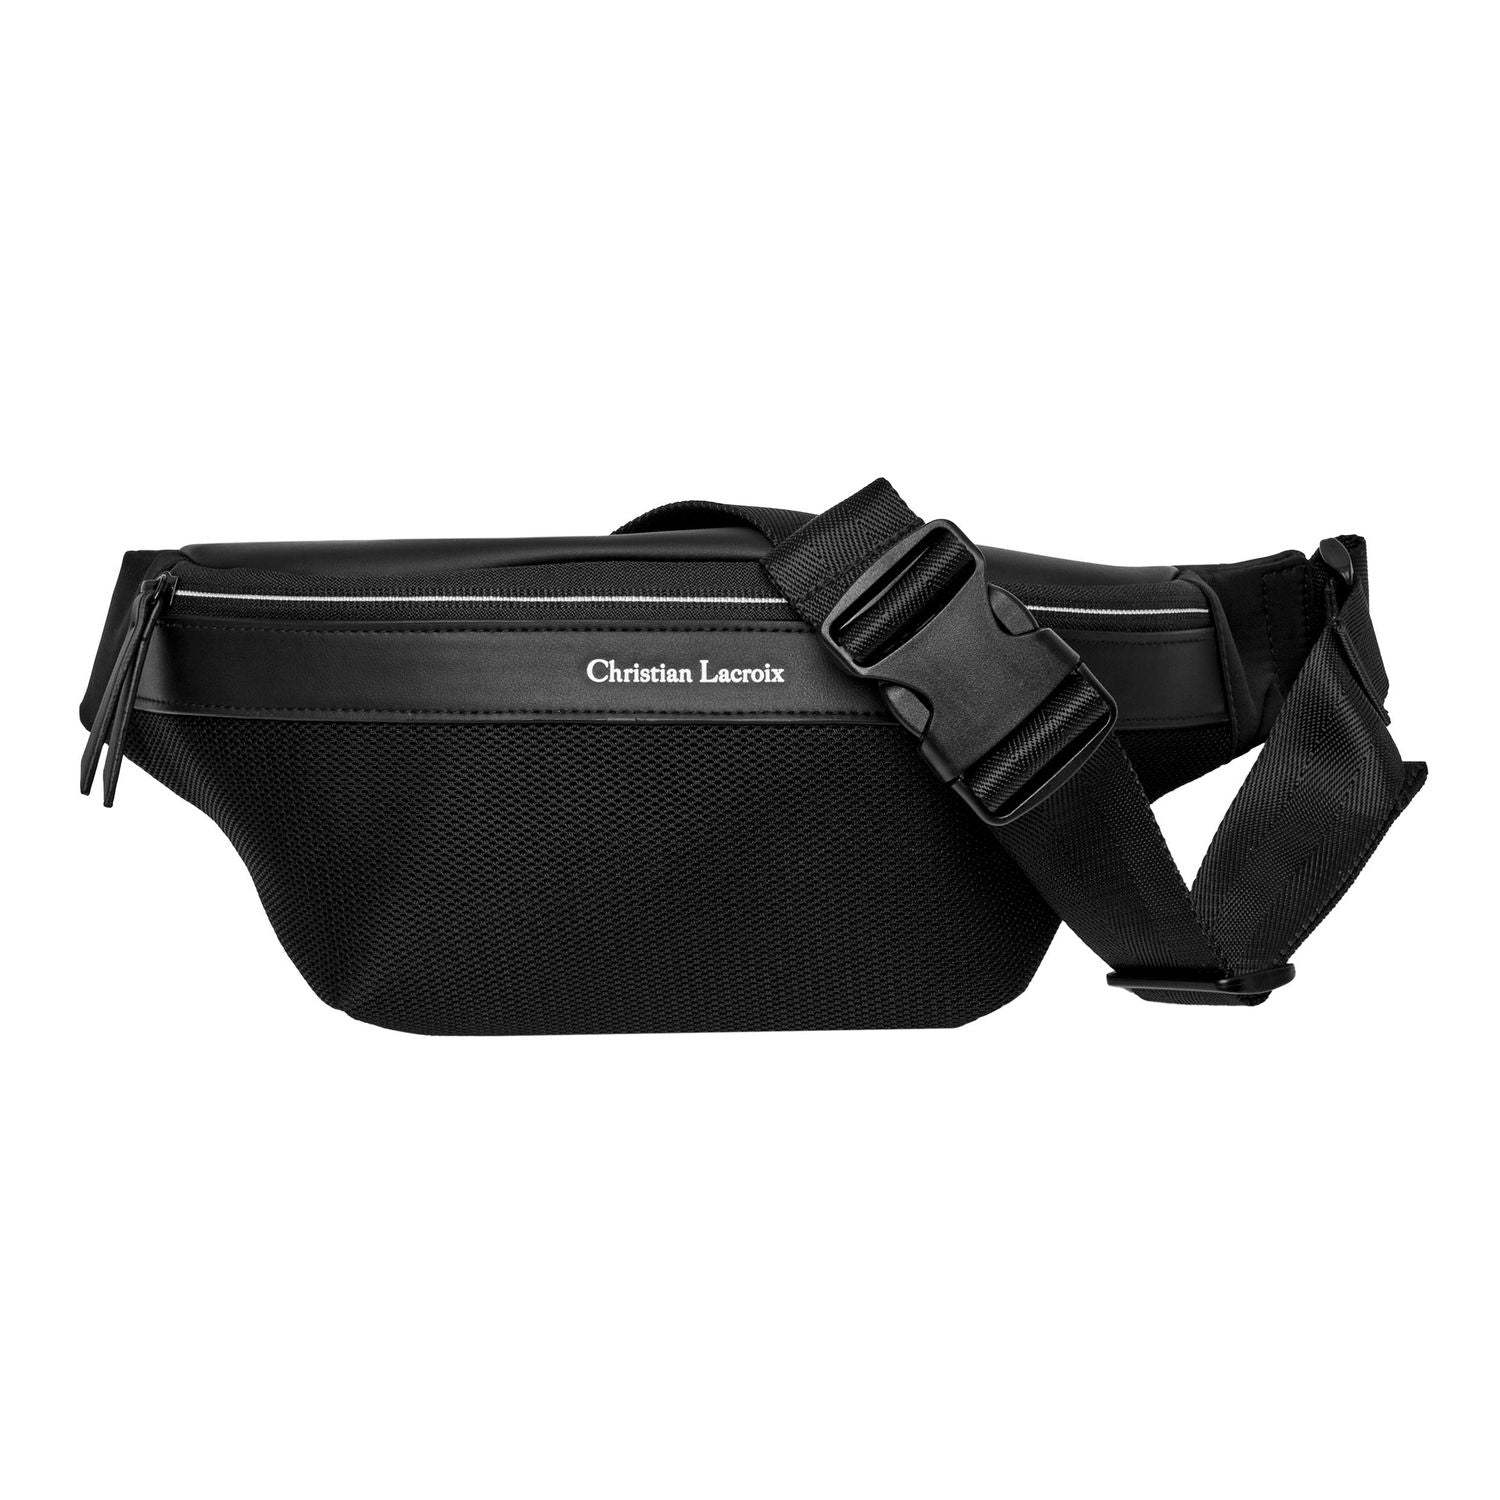 Waistpack Whiteline by Christian Lacroix - The Luxury Promotional Gifts Company Limited